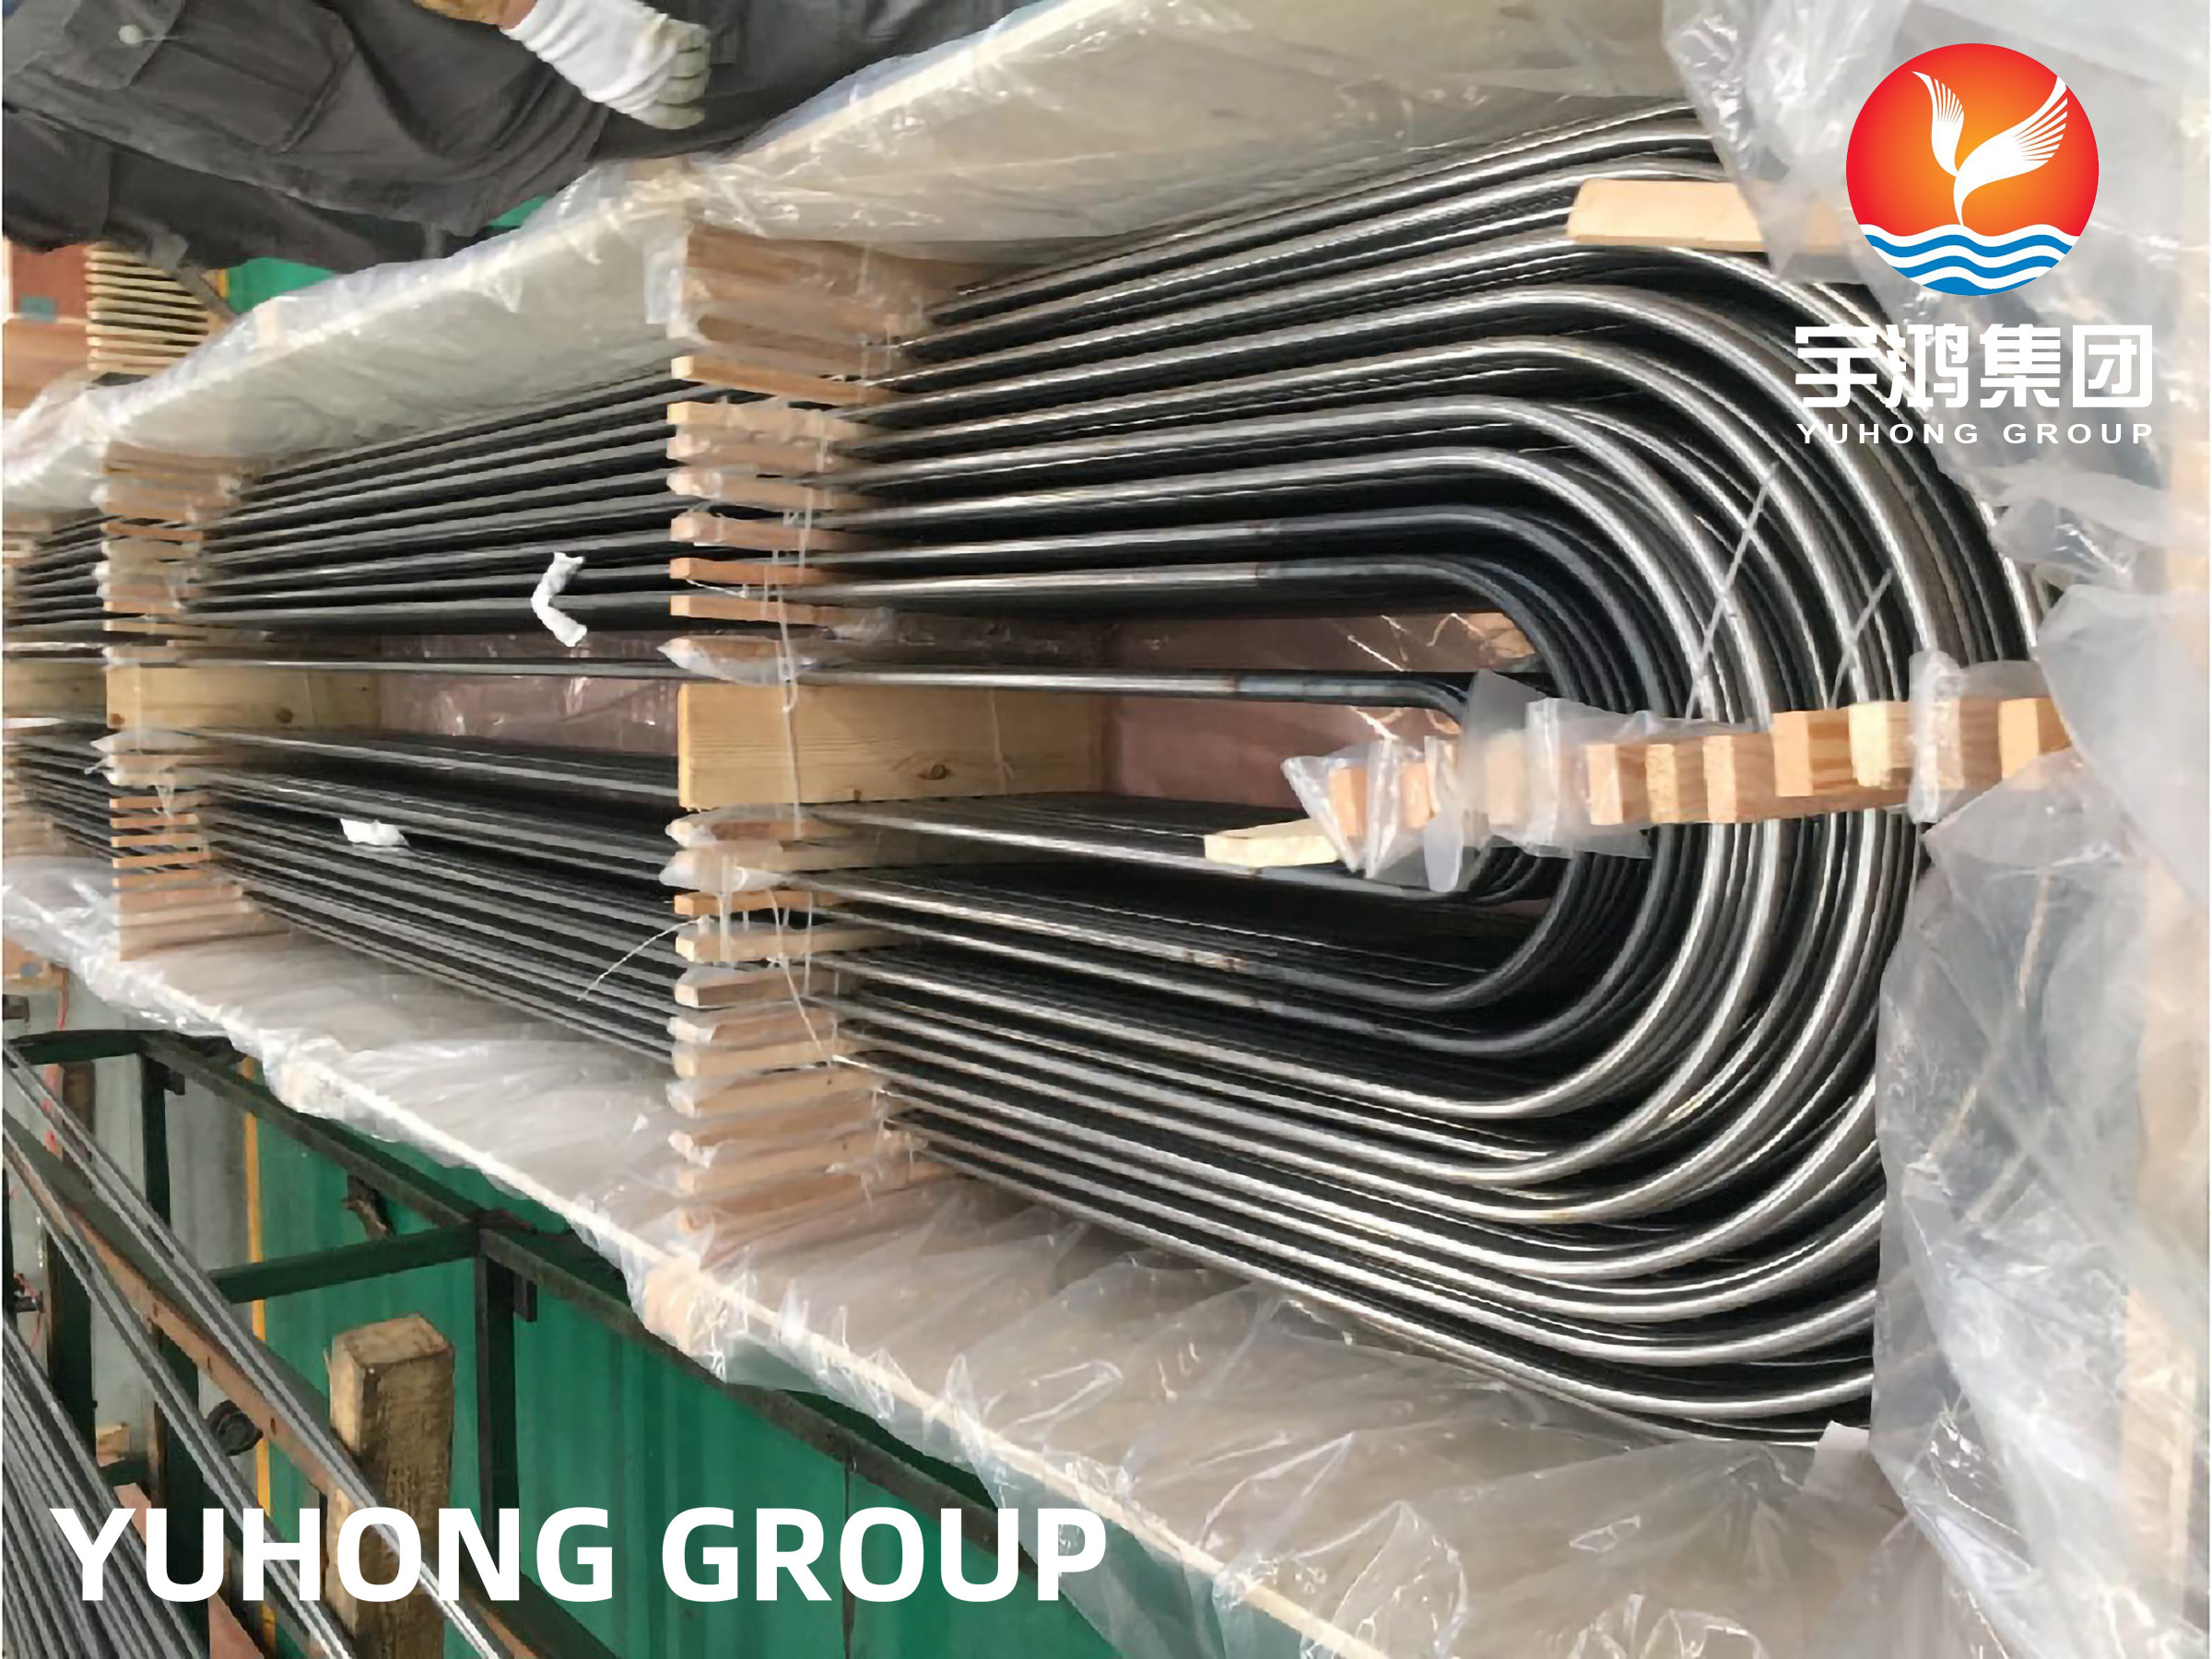 China ASTM A688 / ASME SA688 TP304 BRIGHT ANNEALED U BEND STAINLESS STEEL WELDED TUBE FOR HEAT EXCHANGER wholesale